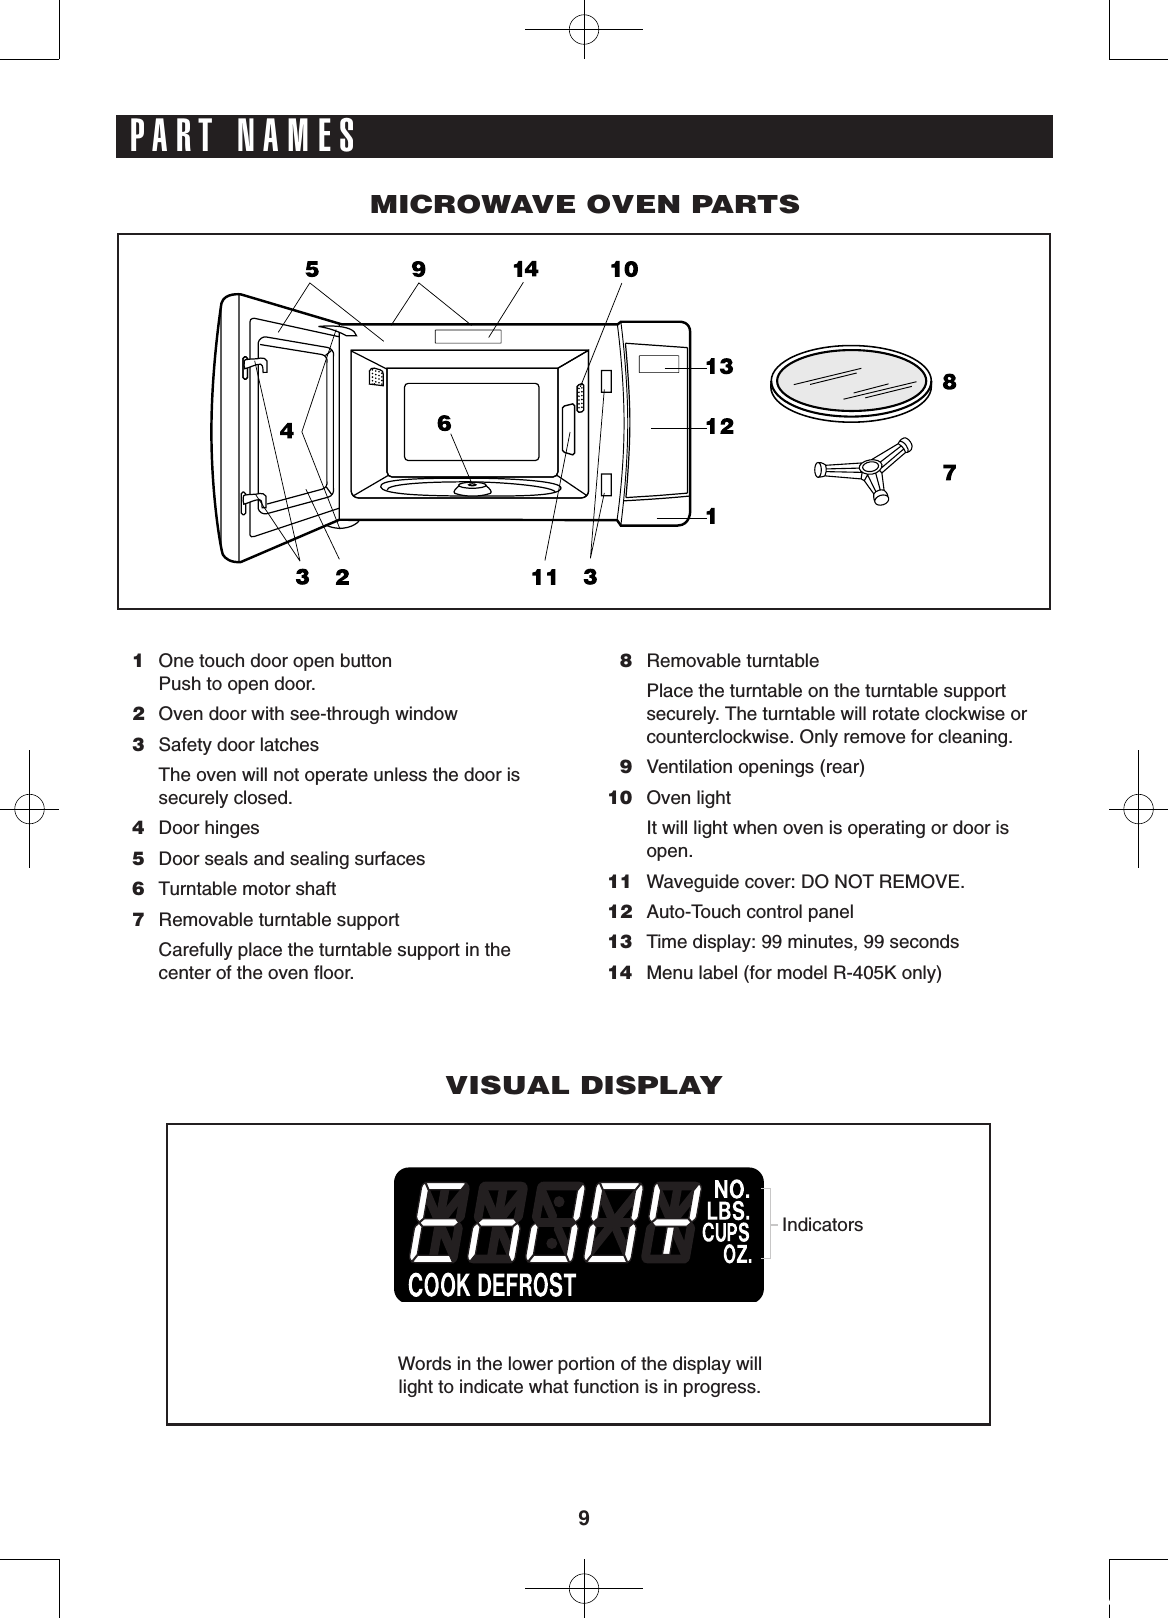 9MICROWAVE OVEN PARTS 1  One touch door open button     Push to open door. 2  Oven door with see-through window 3  Safety door latches    The oven will not operate unless the door is  securely closed. 4  Door hinges 5  Door seals and sealing surfaces 6  Turntable motor shaft 7  Removable turntable support    Carefully place the turntable support in the center of the oven ﬂoor. 8  Removable turntable    Place the turntable on the turntable support securely. The turntable will rotate clockwise or counterclockwise. Only remove for cleaning. 9  Ventilation openings (rear) 10  Oven light    It will light when oven is operating or door is open. 11  Waveguide cover: DO NOT REMOVE. 12  Auto-Touch control panel 13  Time display: 99 minutes, 99 seconds 14  Menu label (for model R-405K only) VISUAL DISPLAYWords in the lower portion of the display will light to indicate what function is in progress.IndicatorsPART NAMES